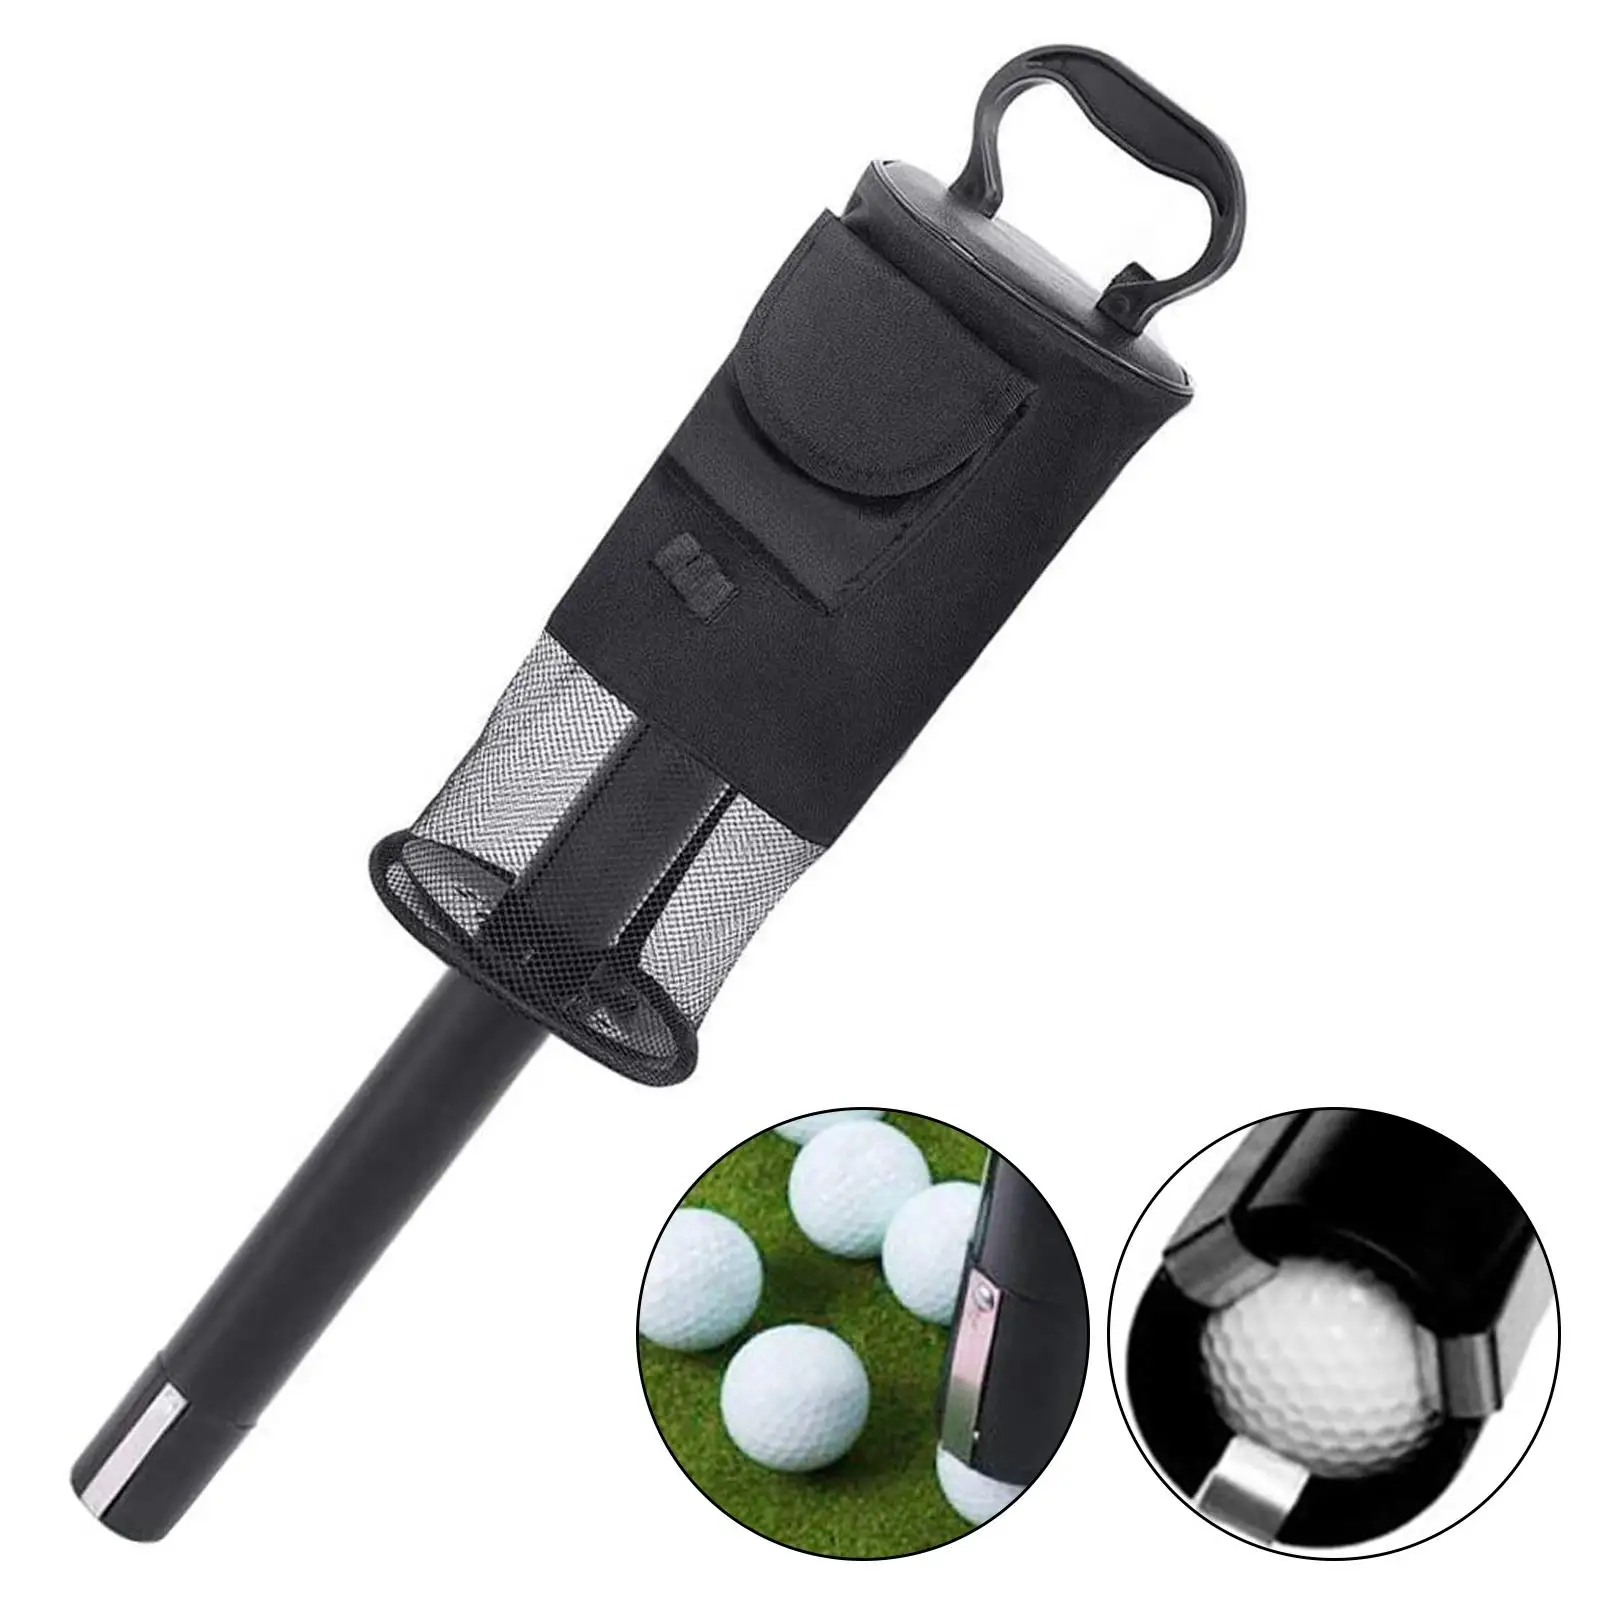 Golf Ball Retriever Bag Holds 70 Balls Durable Golfing Equipment Ball Collector Practice Golf Ball Pick up with Tube